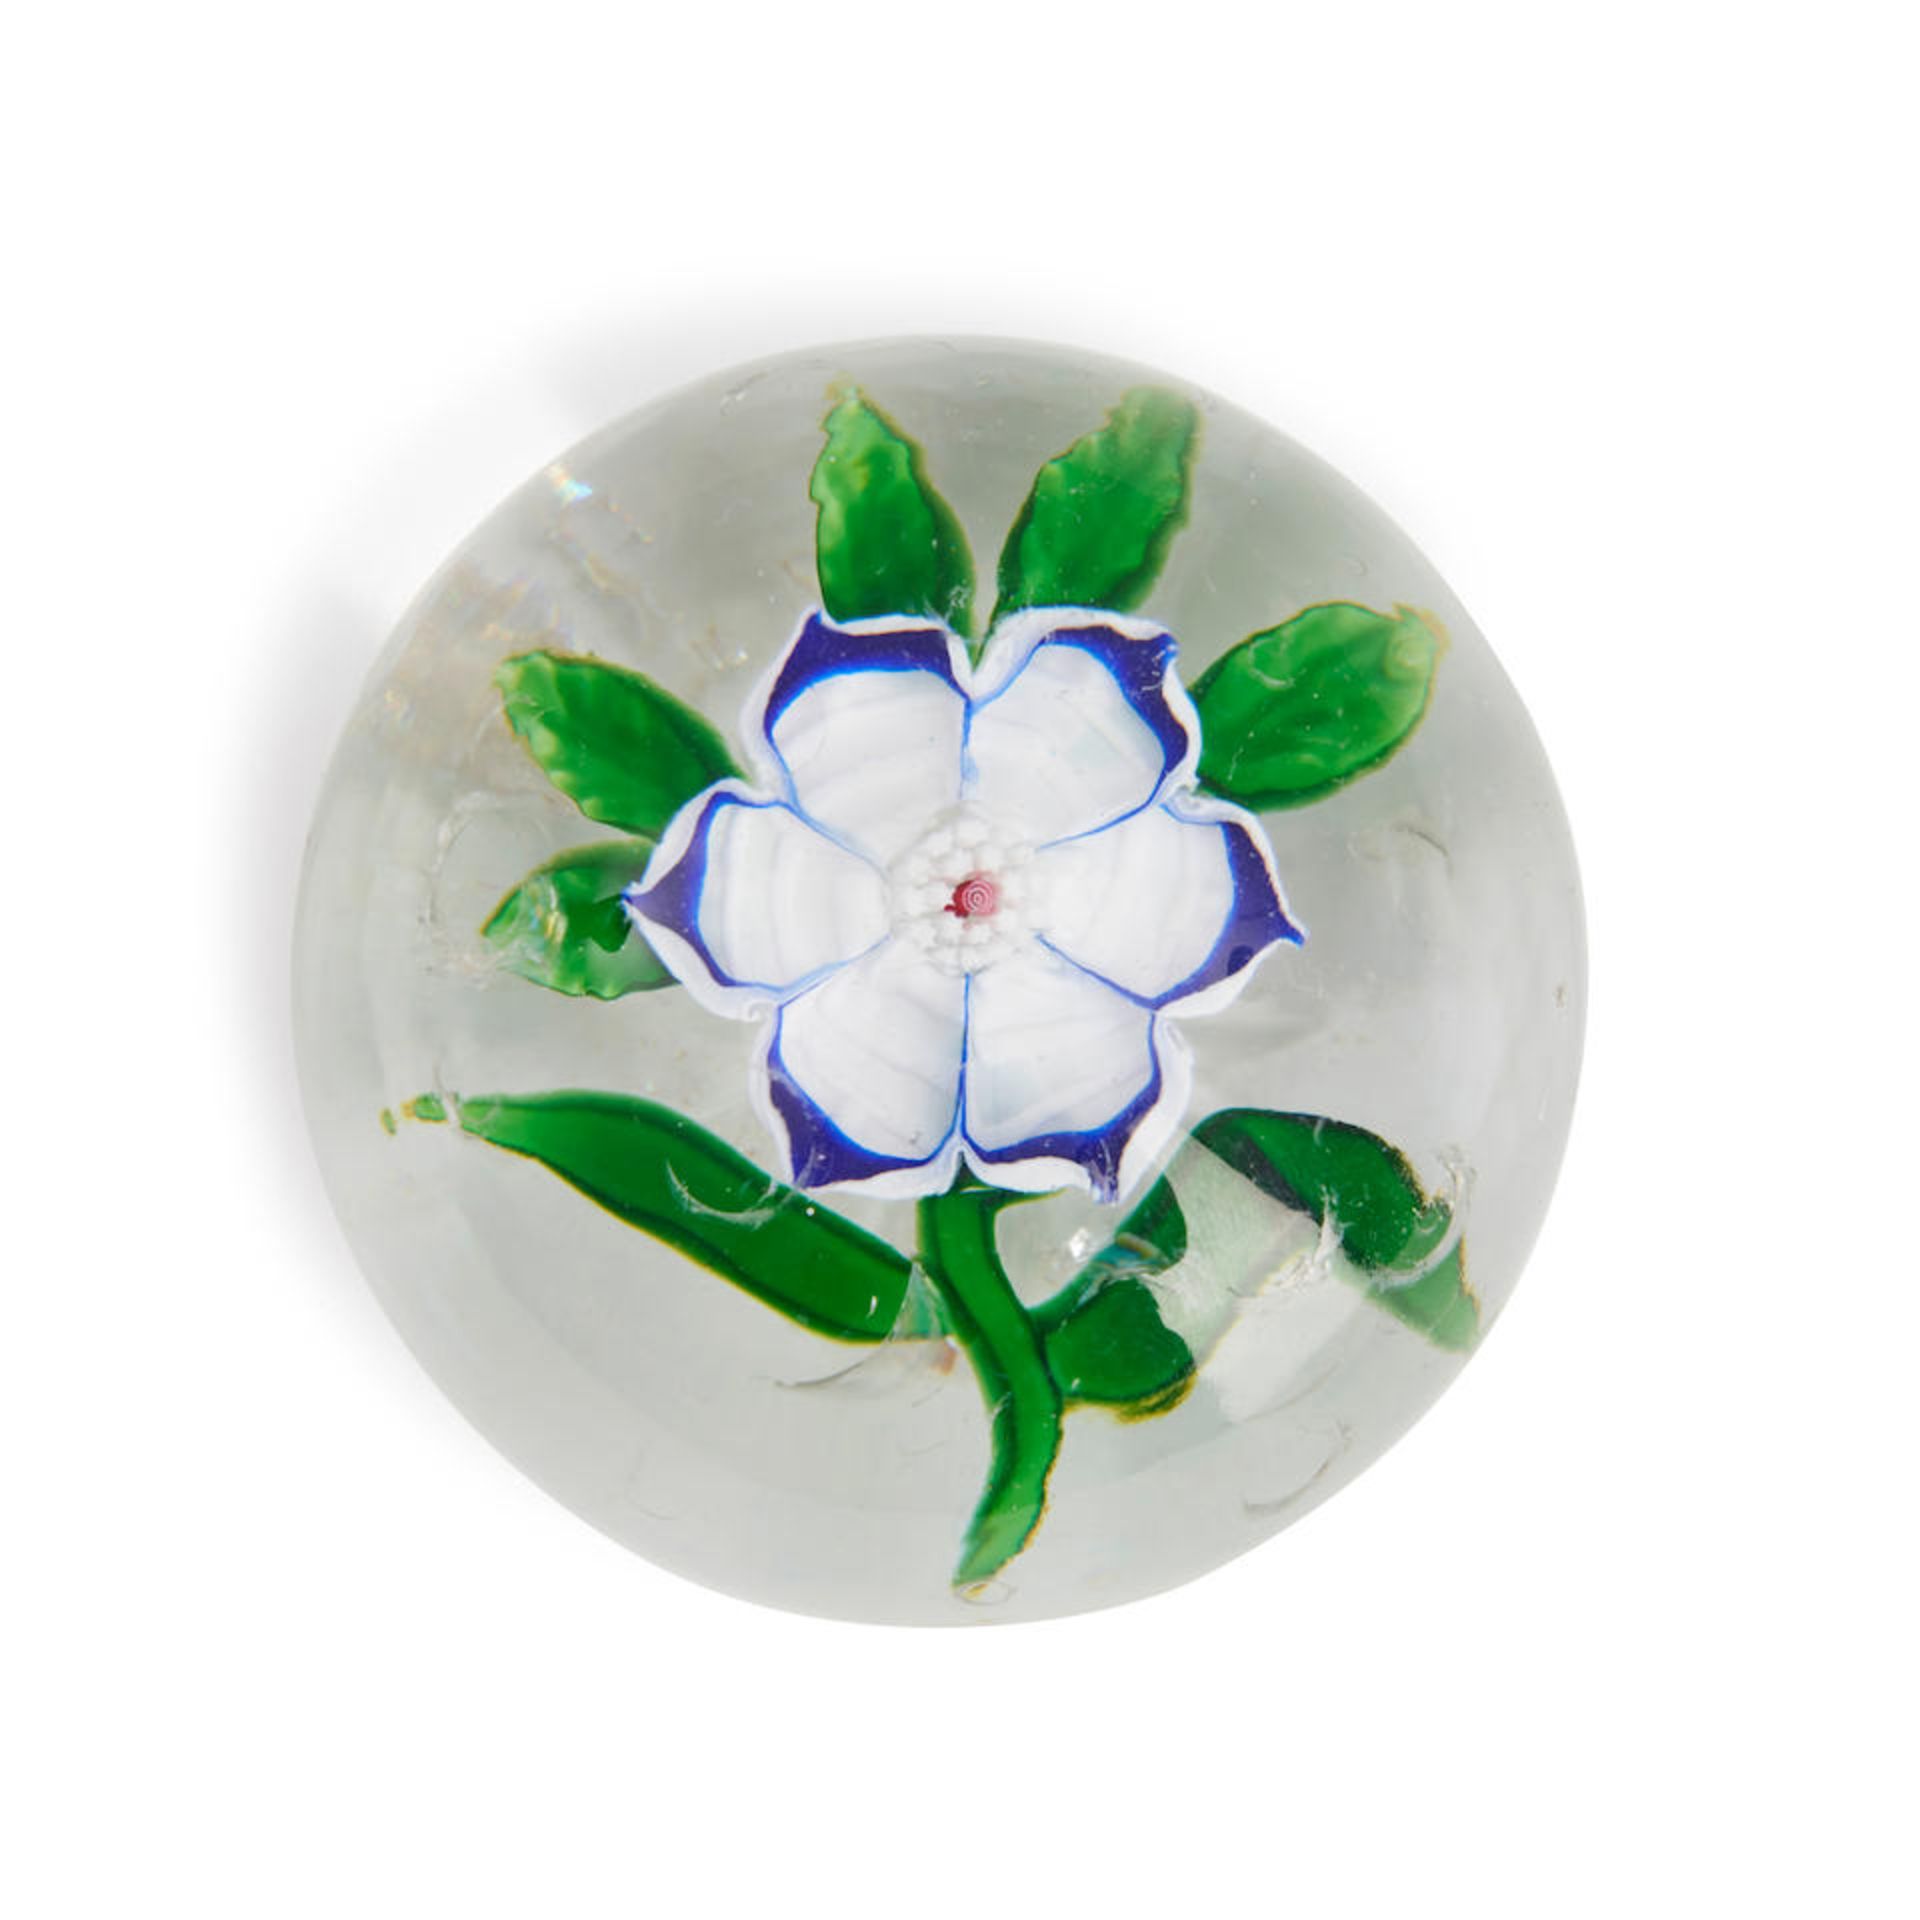 FRENCH GLASS PAPERWEIGHT WITH A SINGLE FLOWER, ht. 1 3/4, dia. 2 1/2 in.